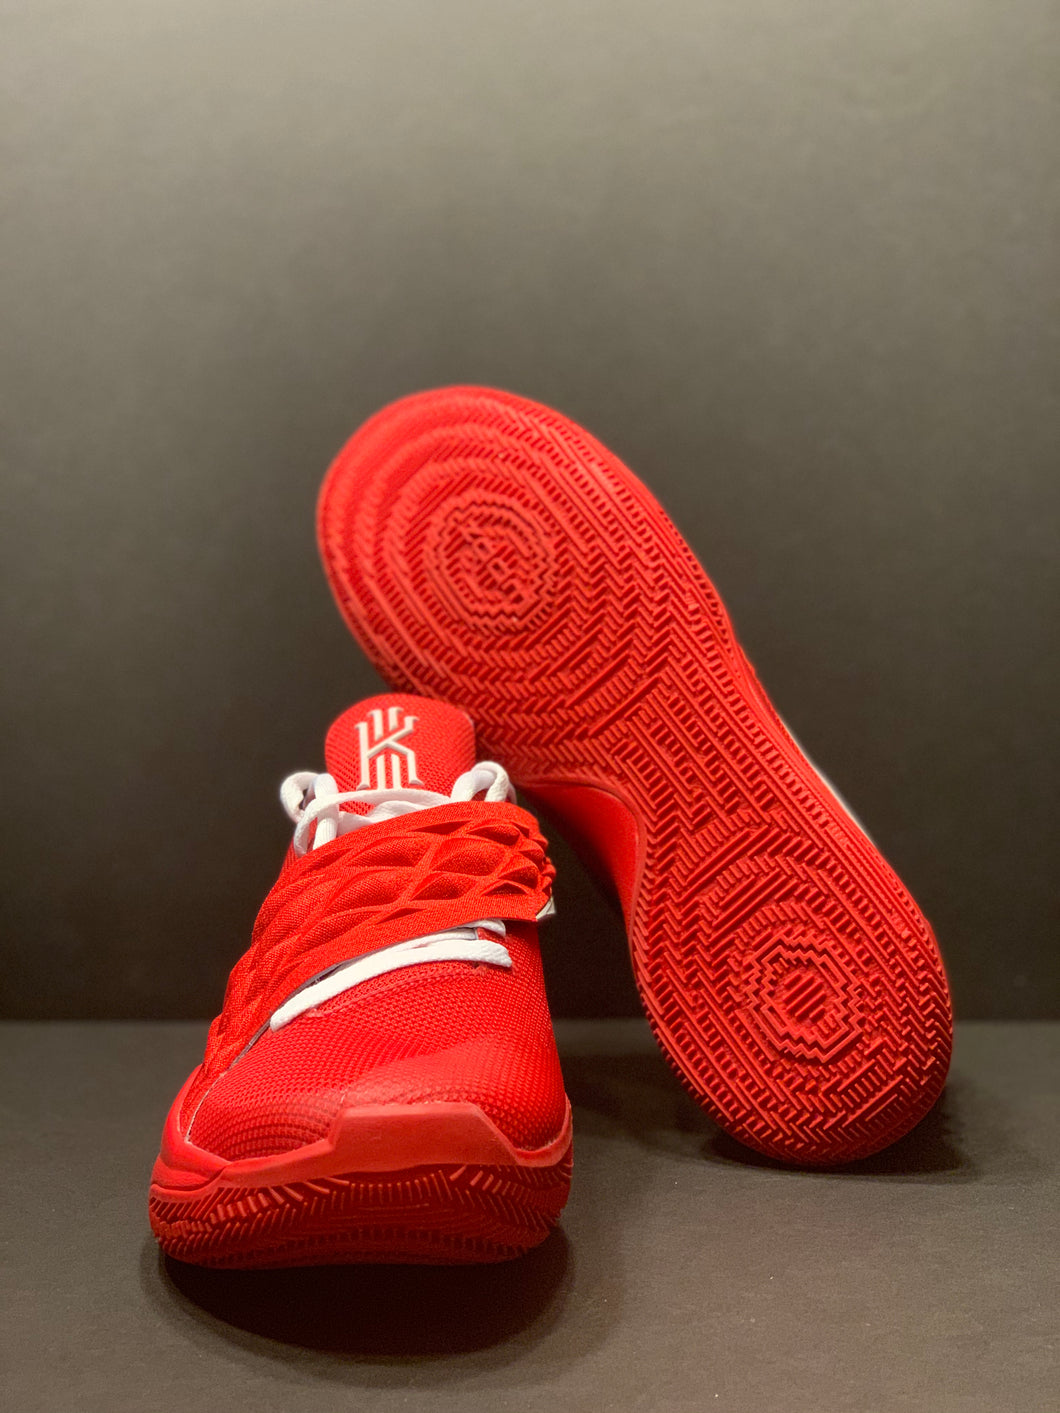 KYRIE 1 LOW - DRAGONS PE (PLAYER EDITION)